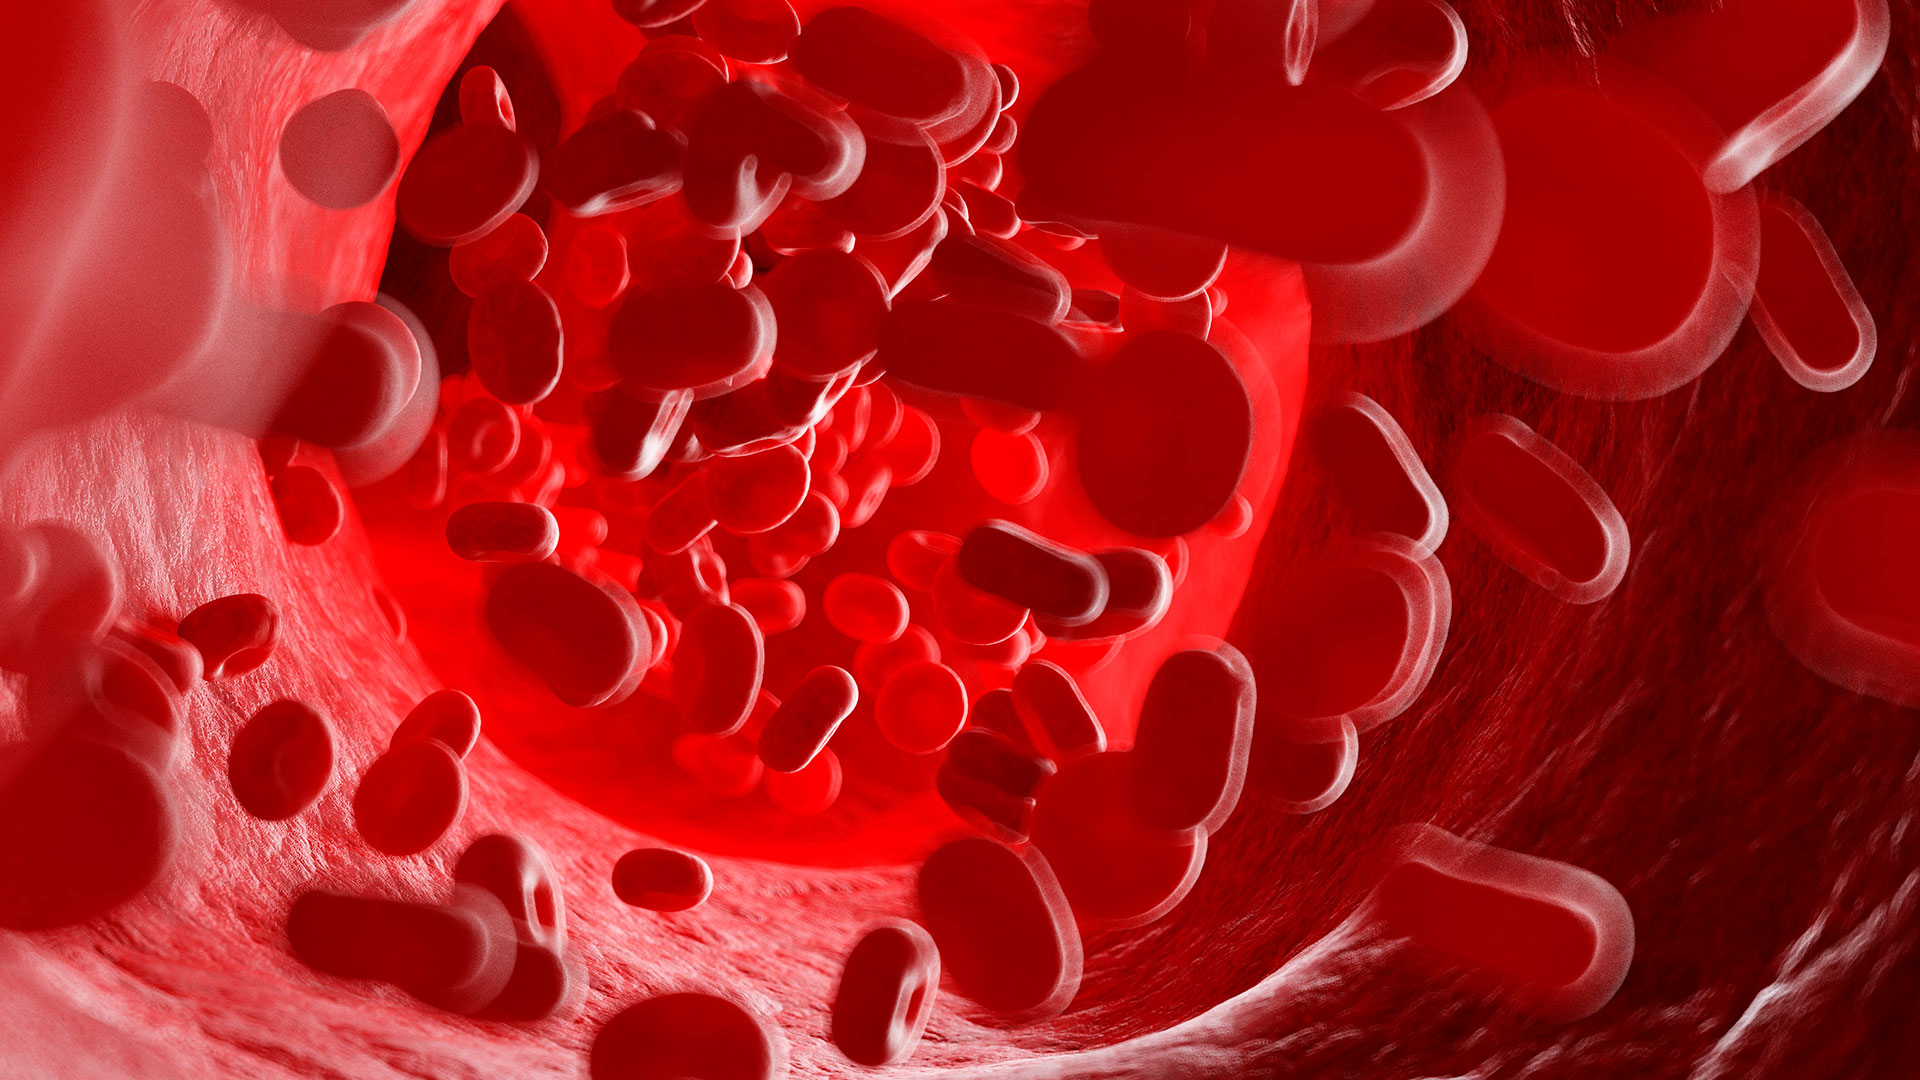 Gaining Insight into Embryonic Blood Formation